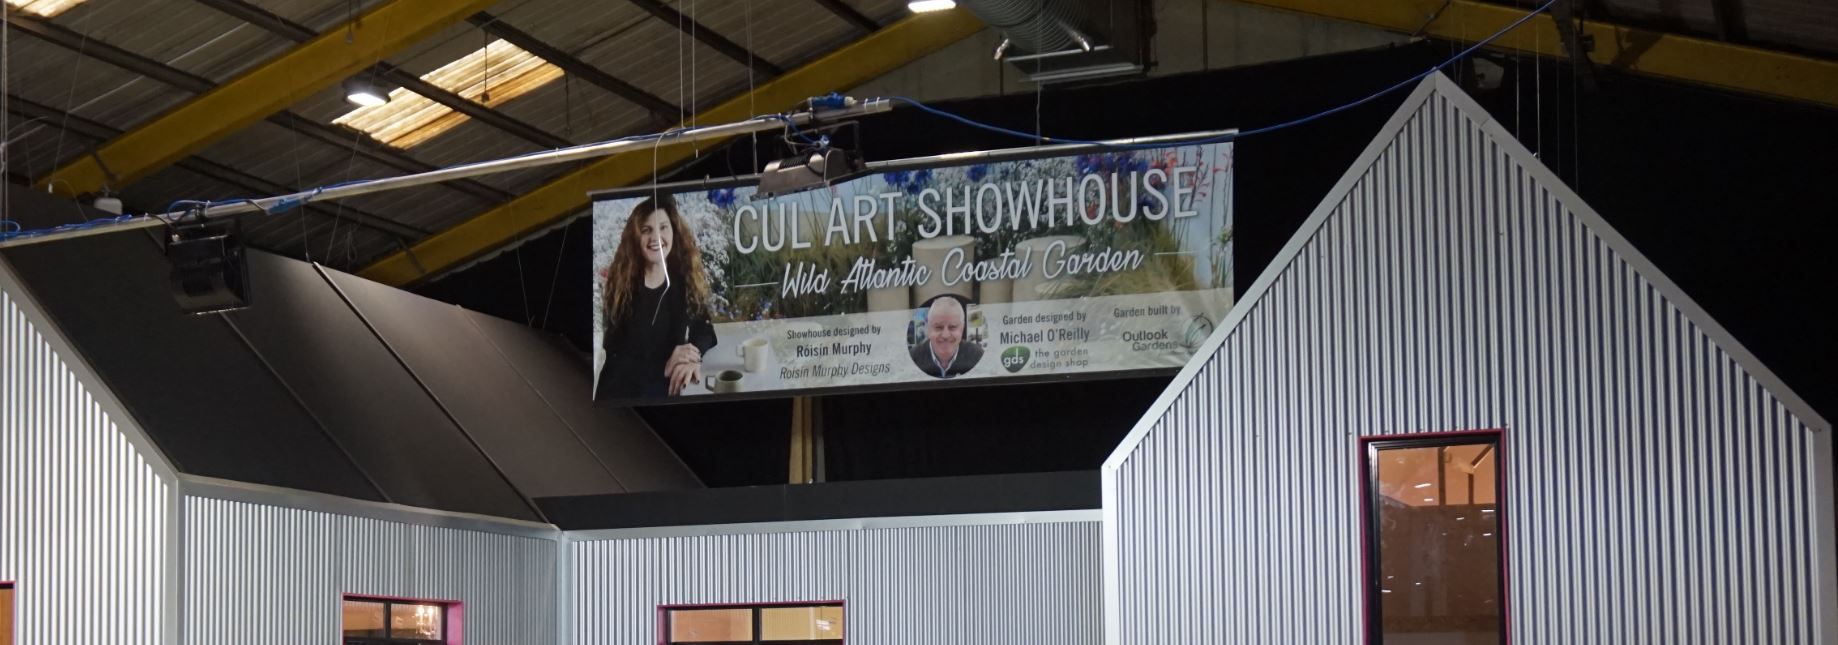 EQC showhouse using profile sheeting - Ideal Home Show, Dublin, 26-29th October 2018